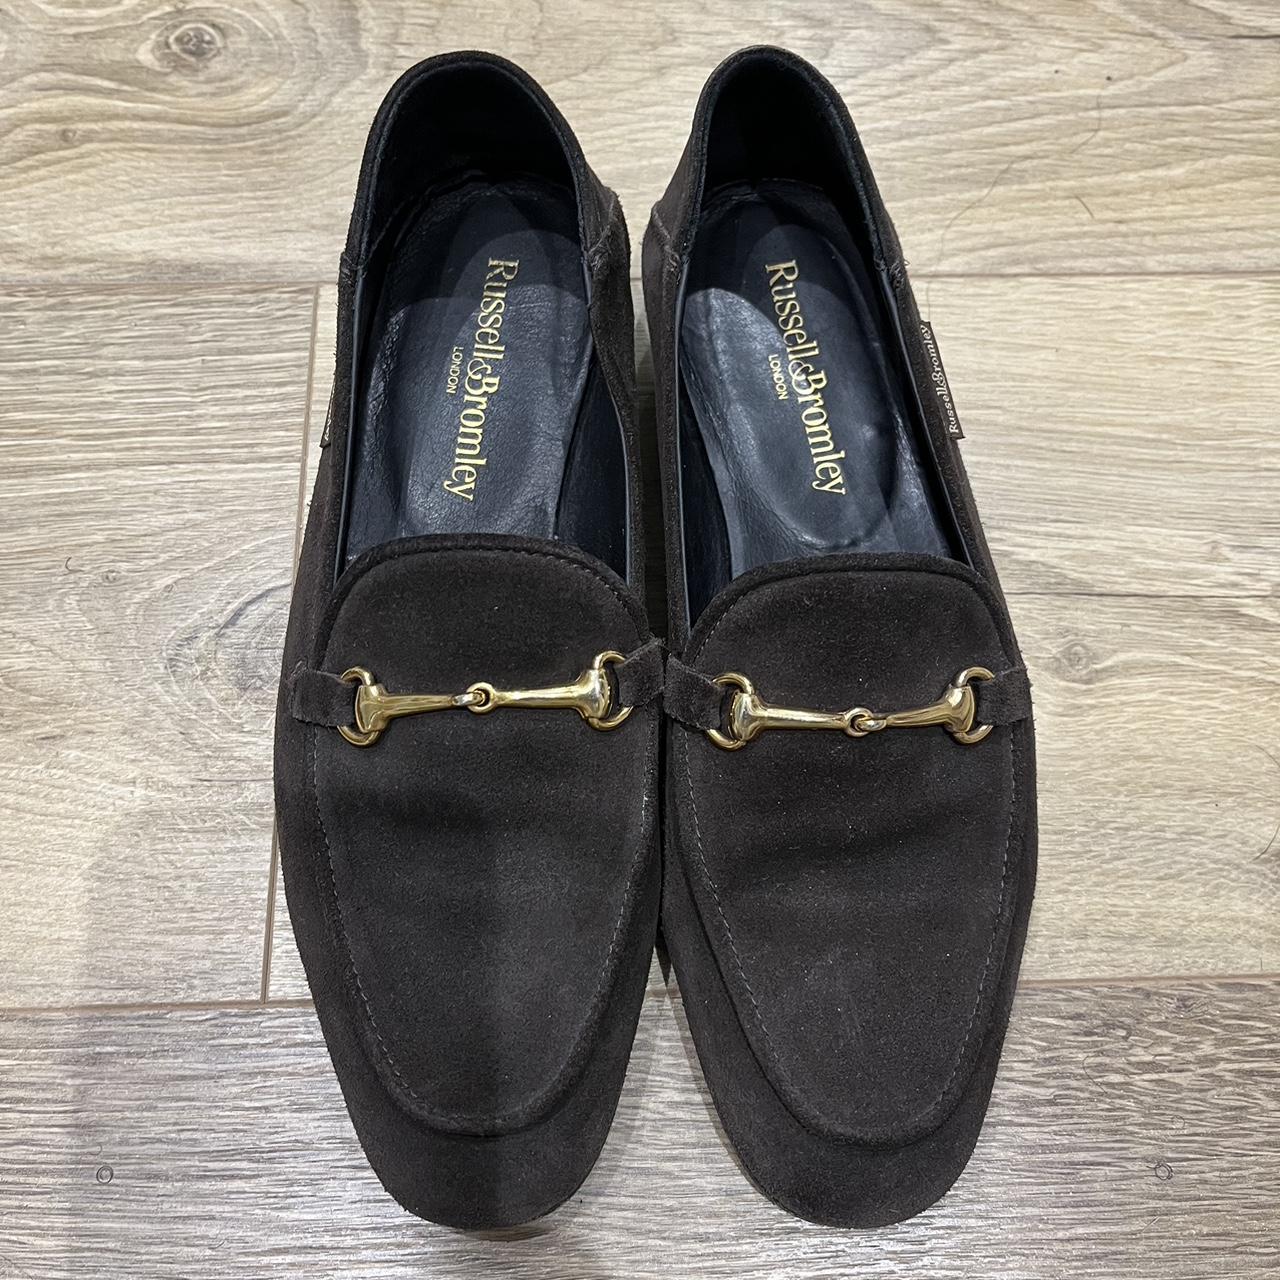 Russell & Bromley Suede Loafer - Depop